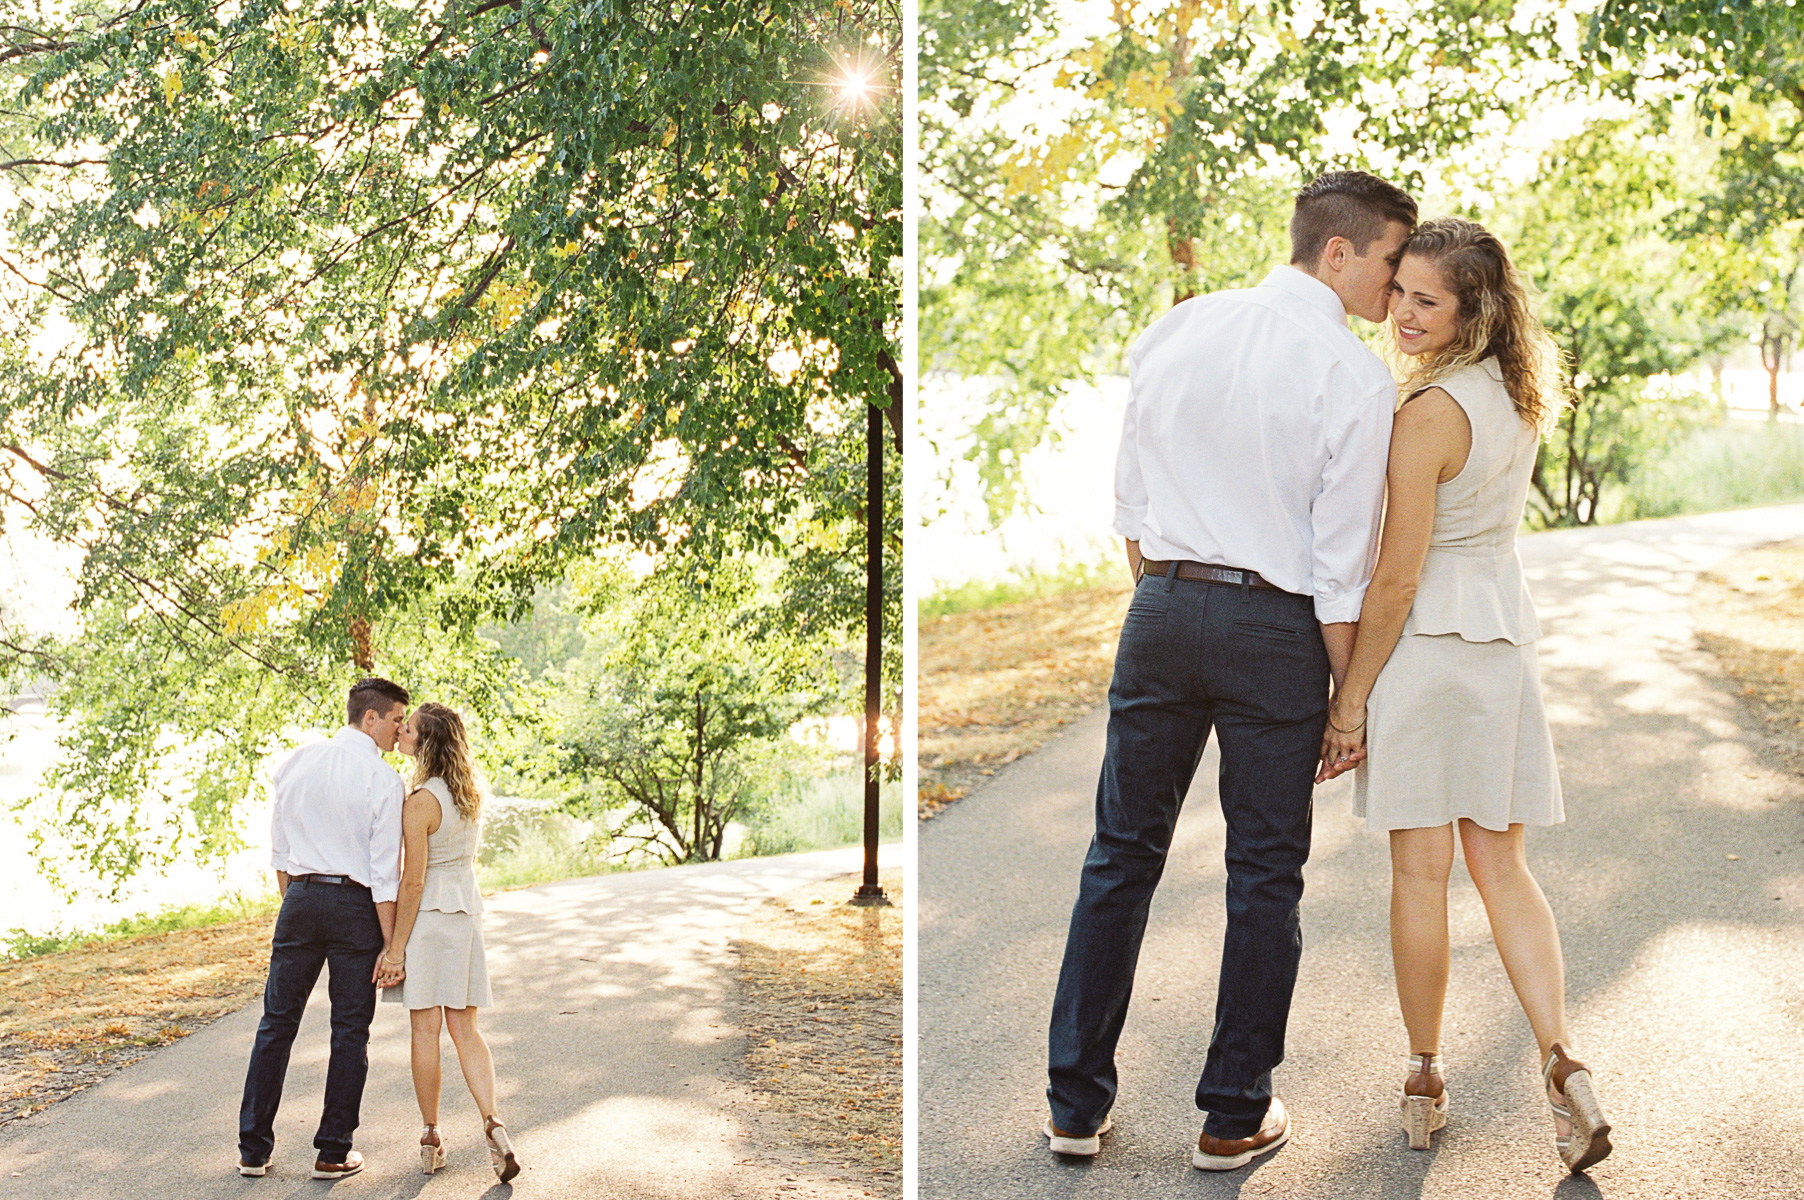 Boston Common Engagement Photo Session under willow trees